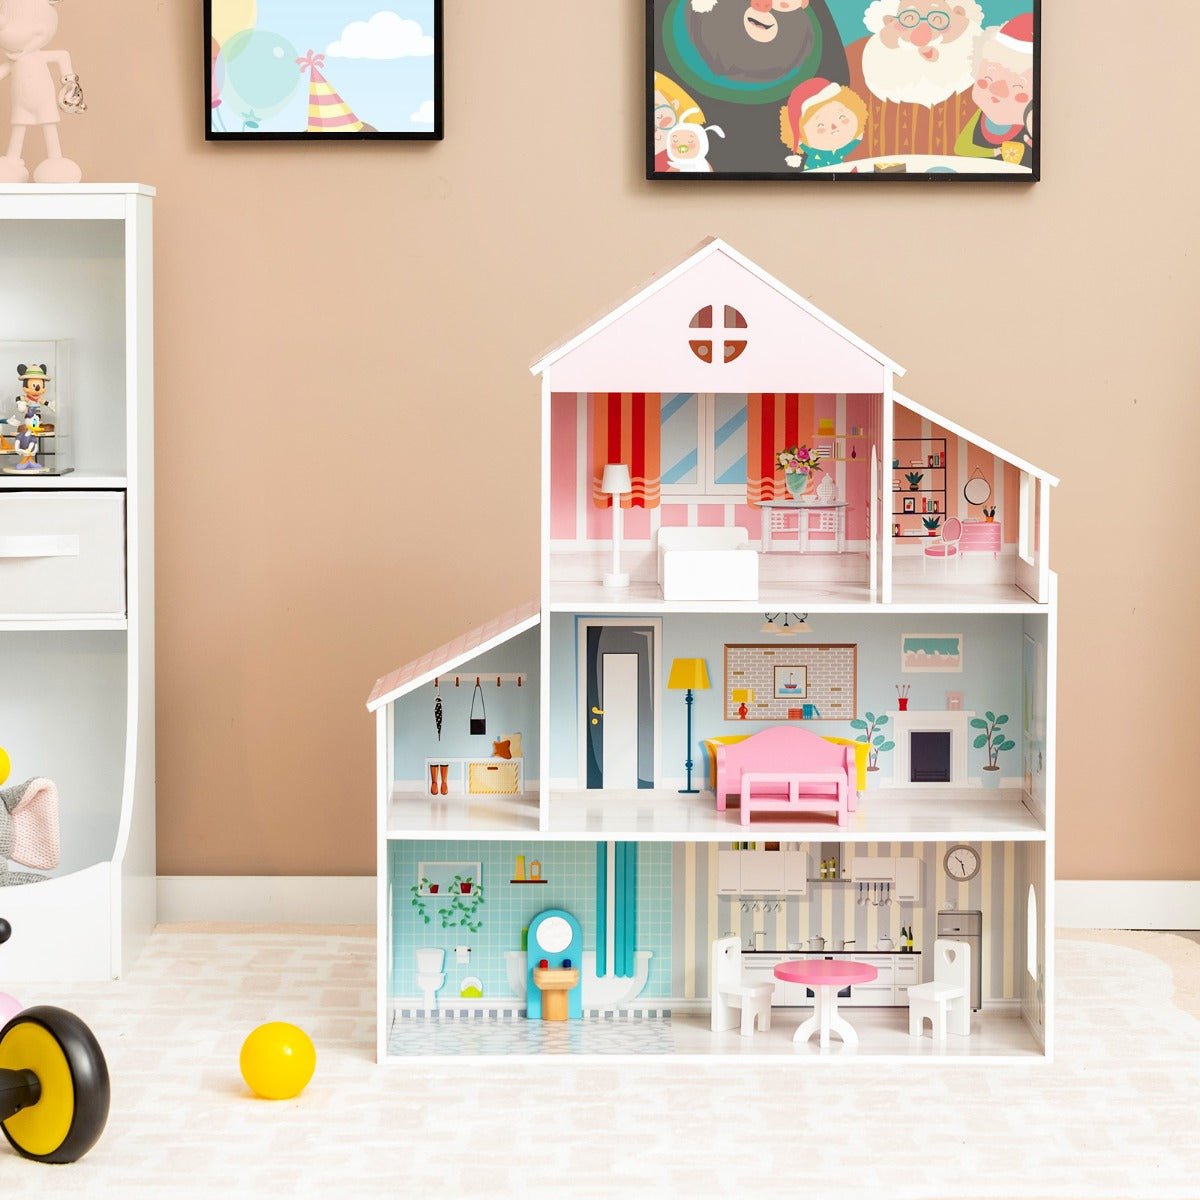 Furnished Wooden Doll House: A Dreamy Space for Imaginative Adventures